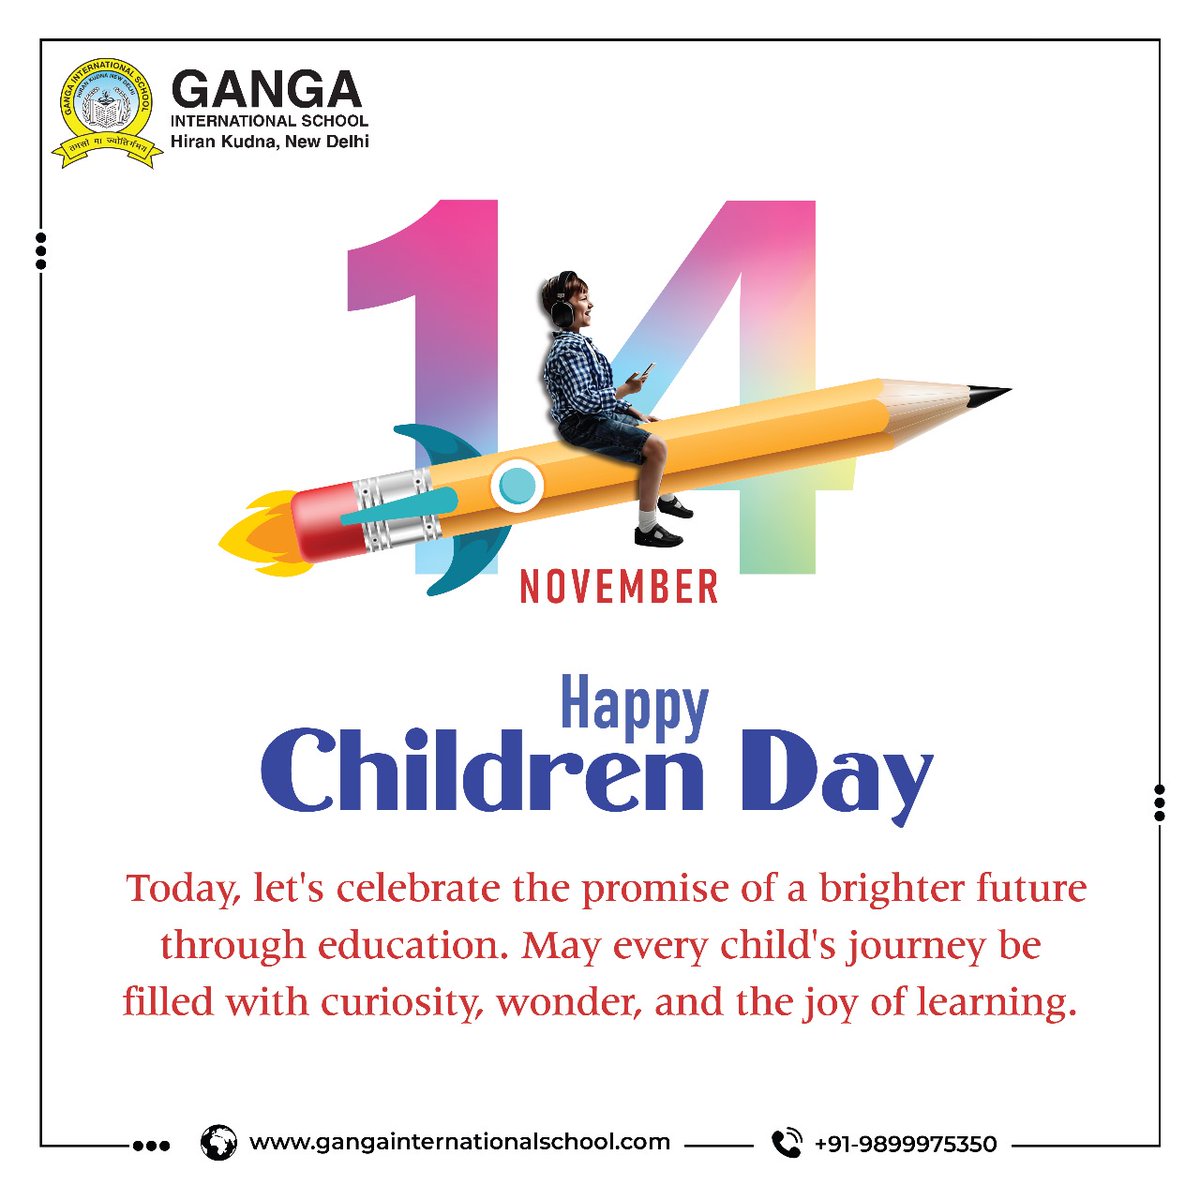 Happy Children's Day!
May their journey be filled with curiosity, wonder, and the joy of learning.
.
.
.
#childrenday #children #childrensday #kids #love #happychildrensday #child #happychildren #GIS #besteducation #Topschool #parentschoice #trustedschool #admissionopen24_25